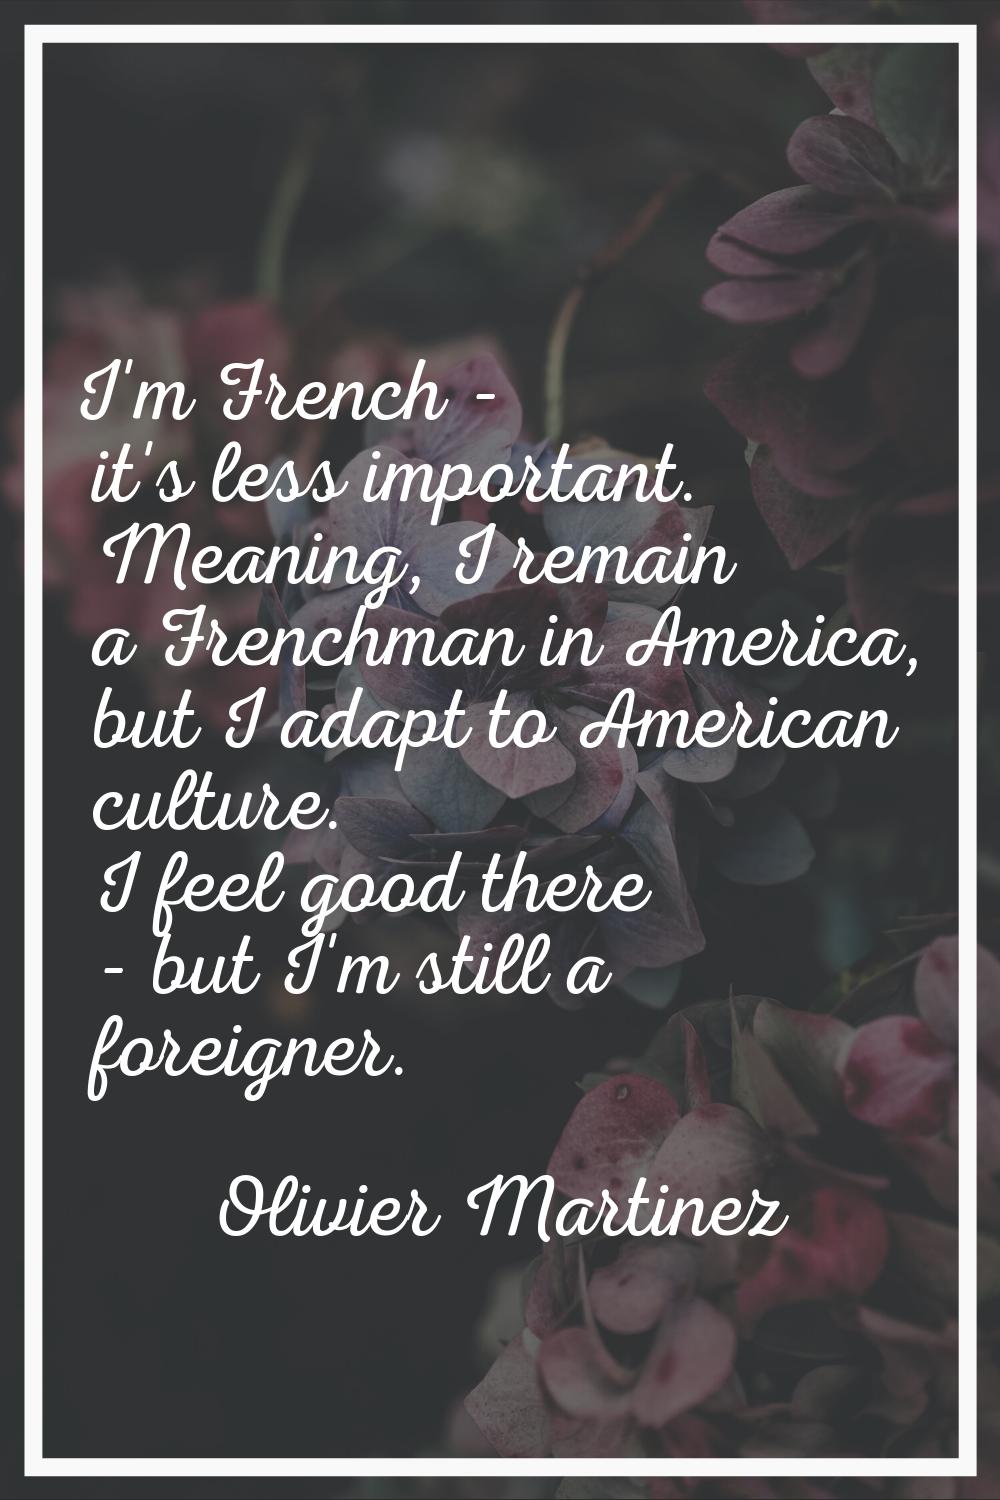 I'm French - it's less important. Meaning, I remain a Frenchman in America, but I adapt to American